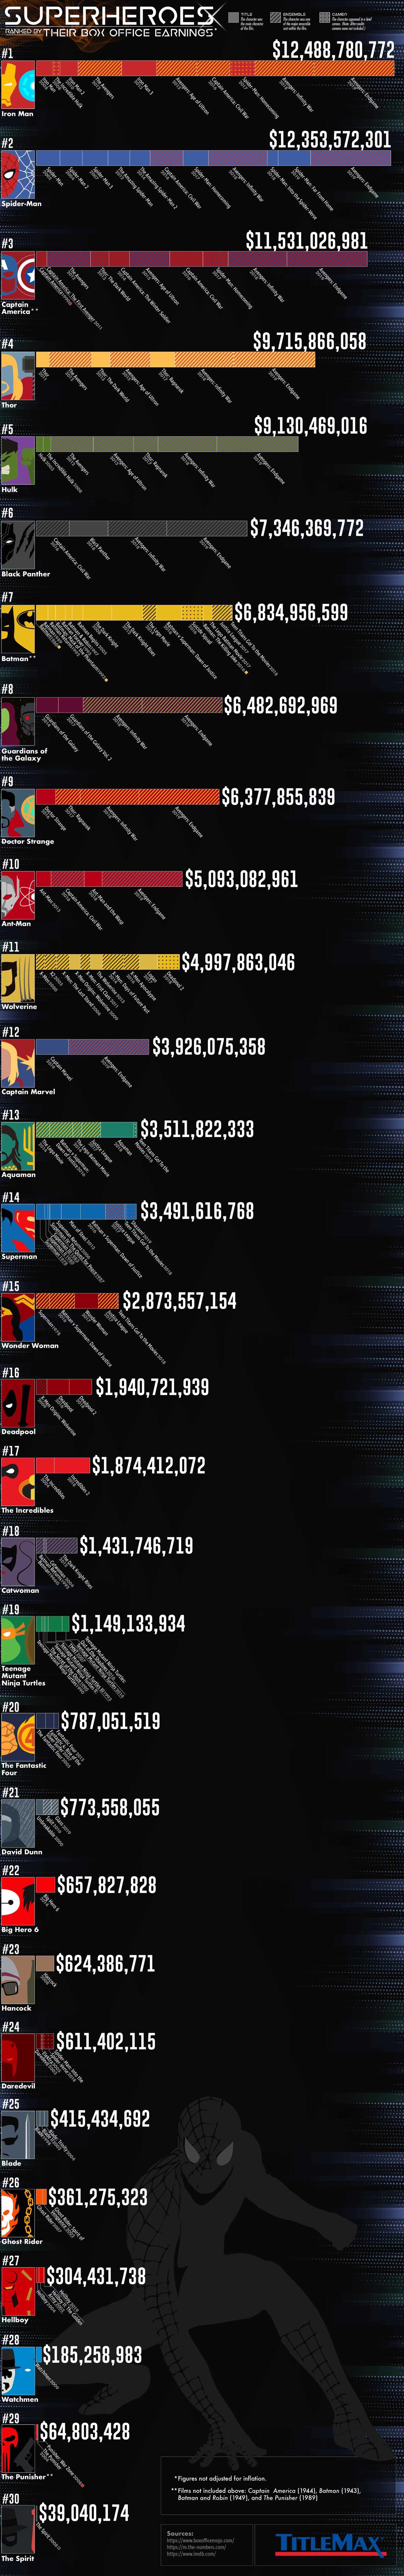 Superheroes Ranked by Their Box Office Earnings